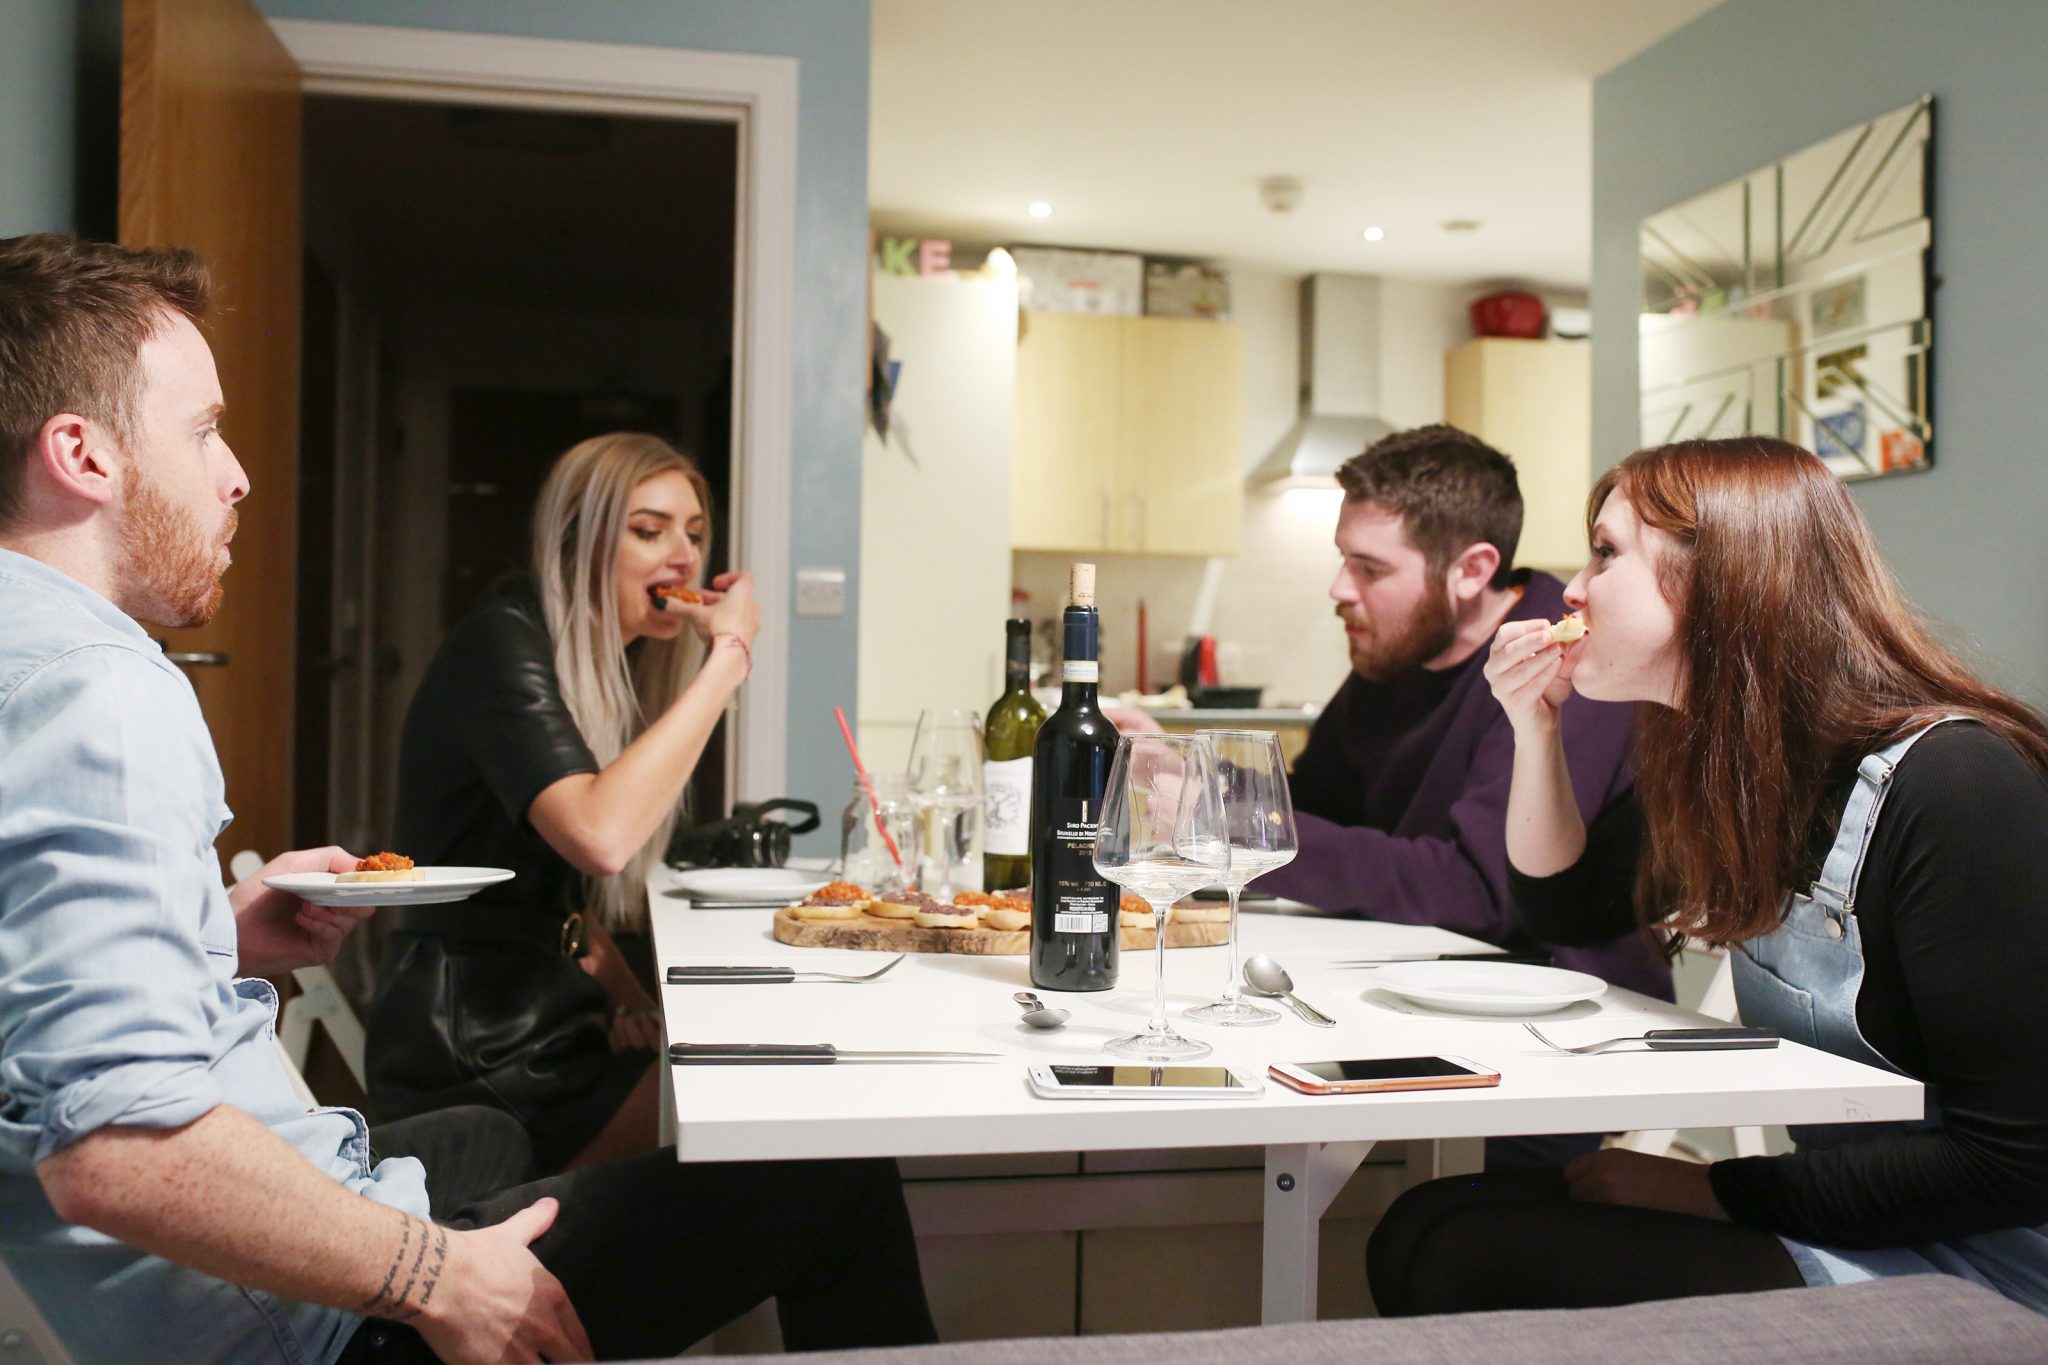 Laura Kate Lucas - Manchester Lifestyle, Fashion and Food Blogger - La Belle Assiette Dinner Party Review